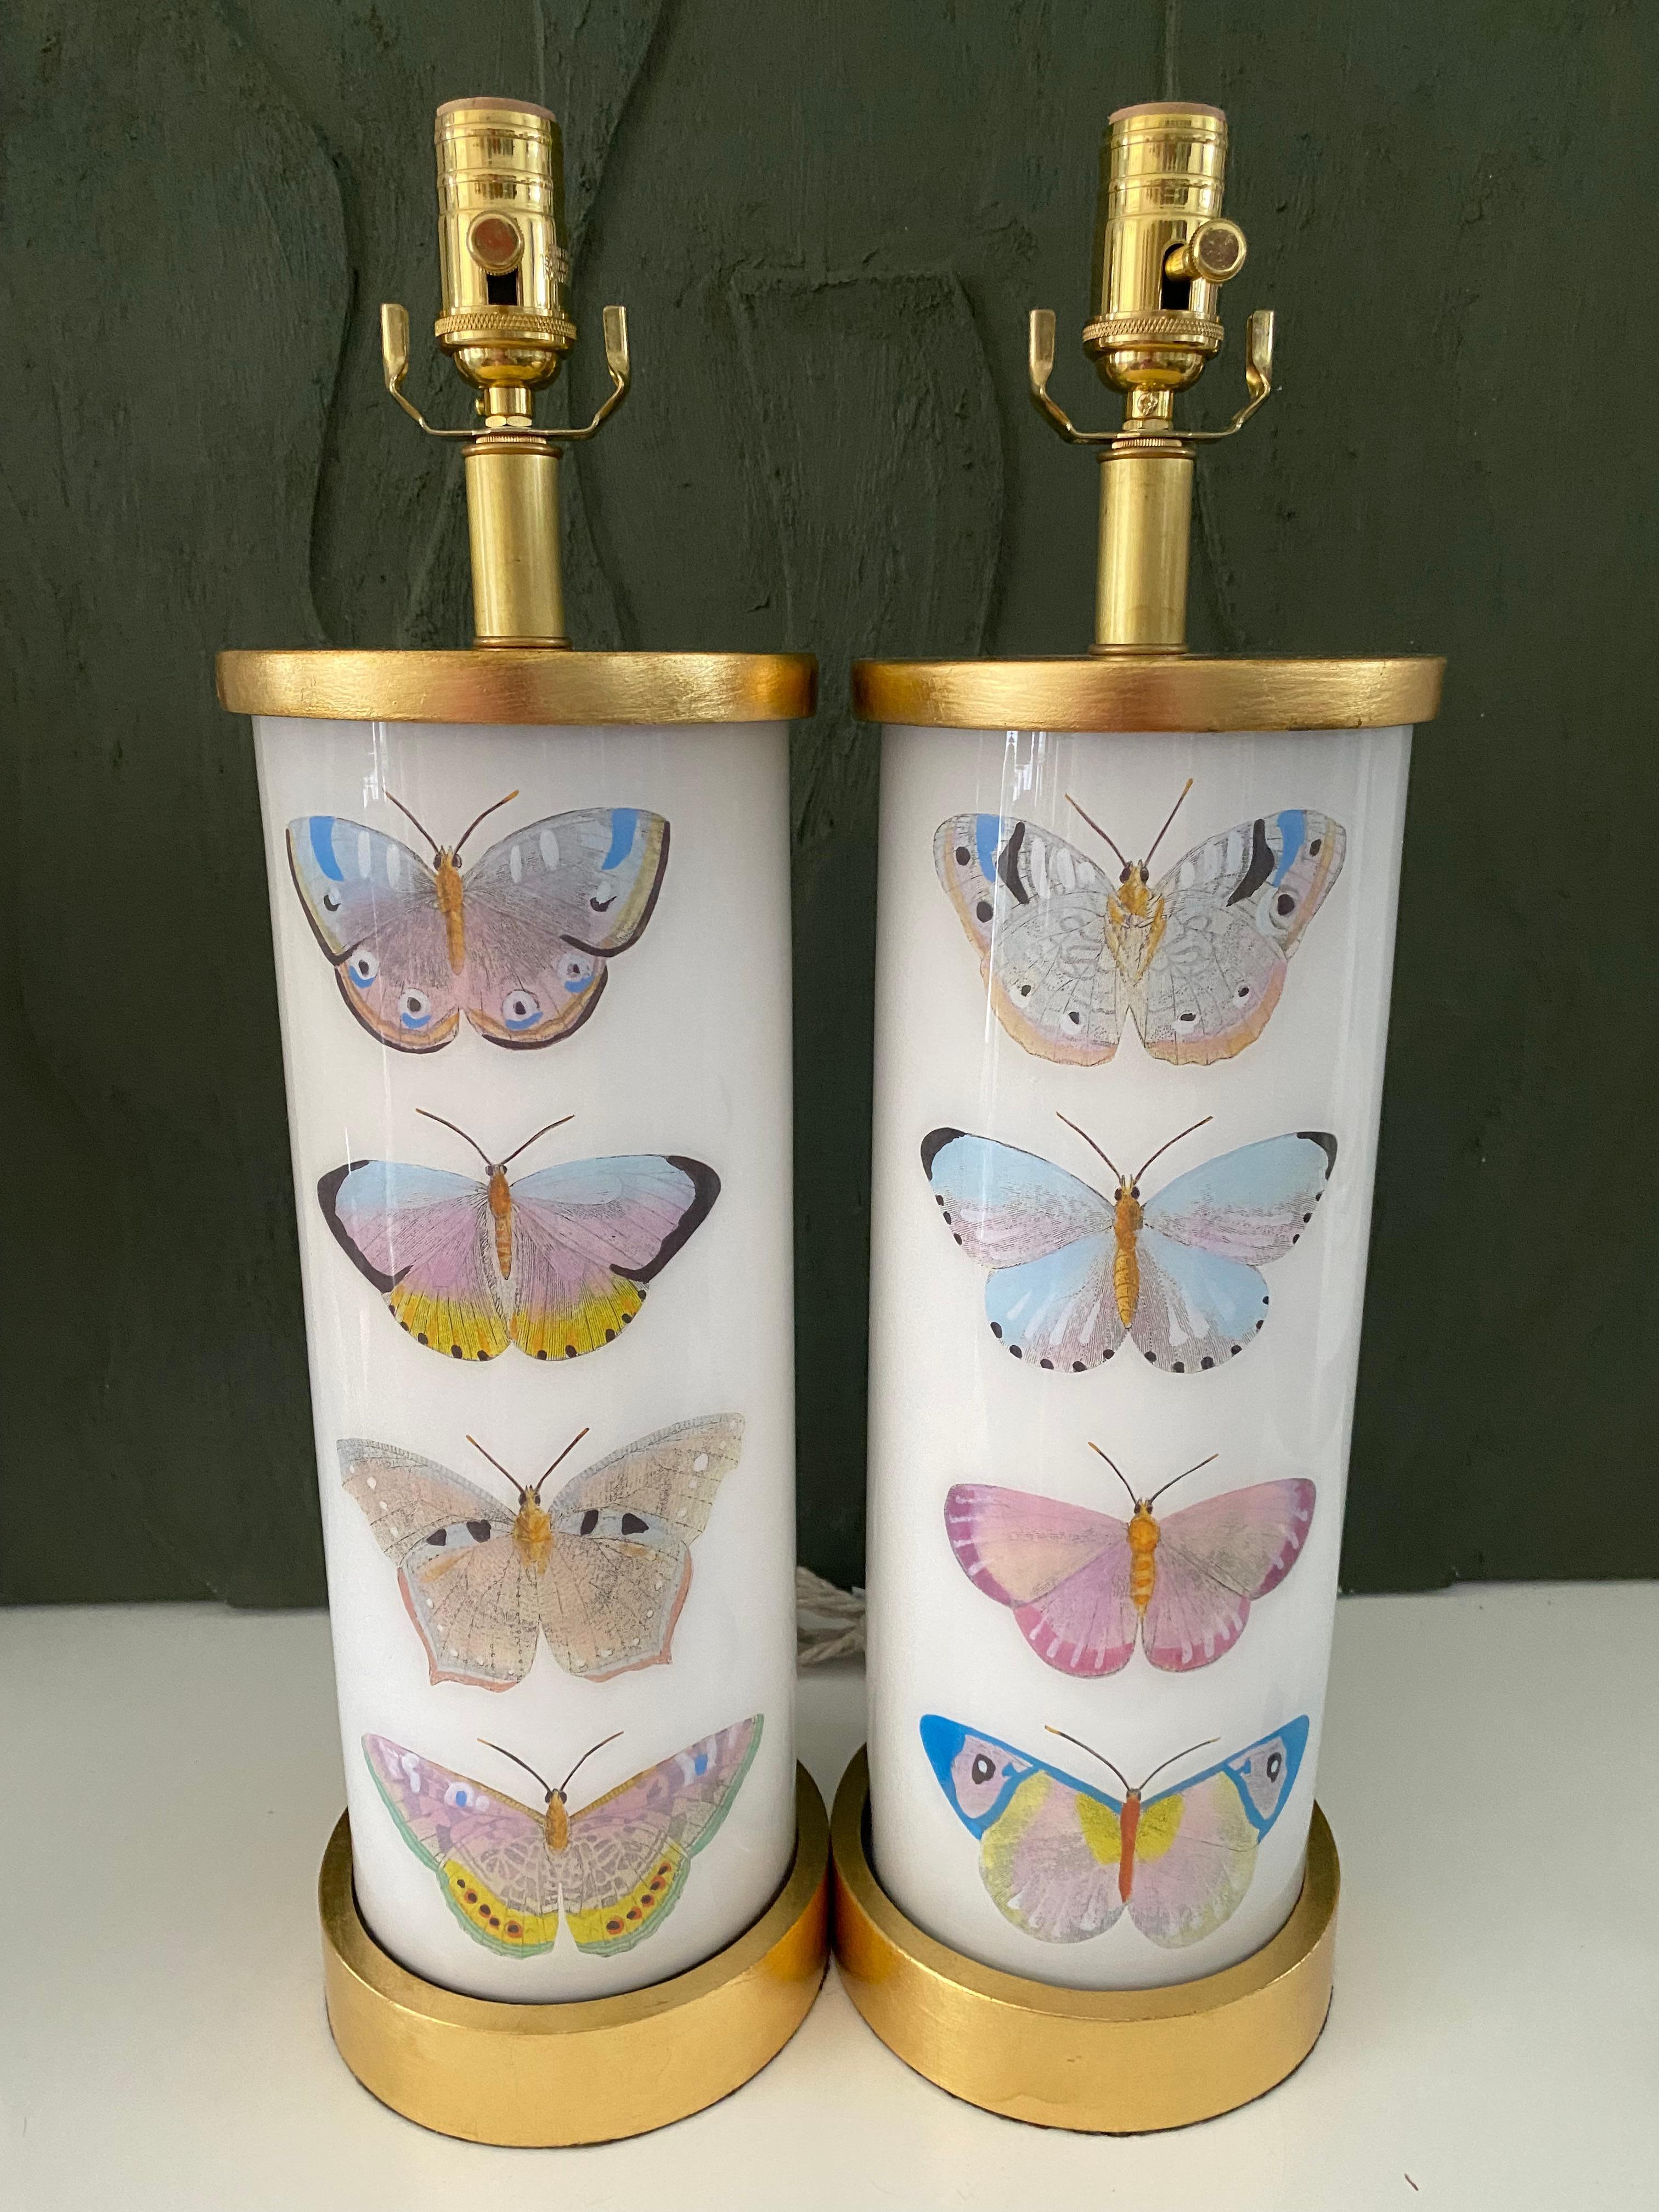 Hand made with care in Houston, Texas. This pair of glass lamps features a selection of 18th century hand-colored engravings of beautiful pastel butterflies, with hand turned with hand-turned gilt wood base and cap, polished brass dimmer socket and